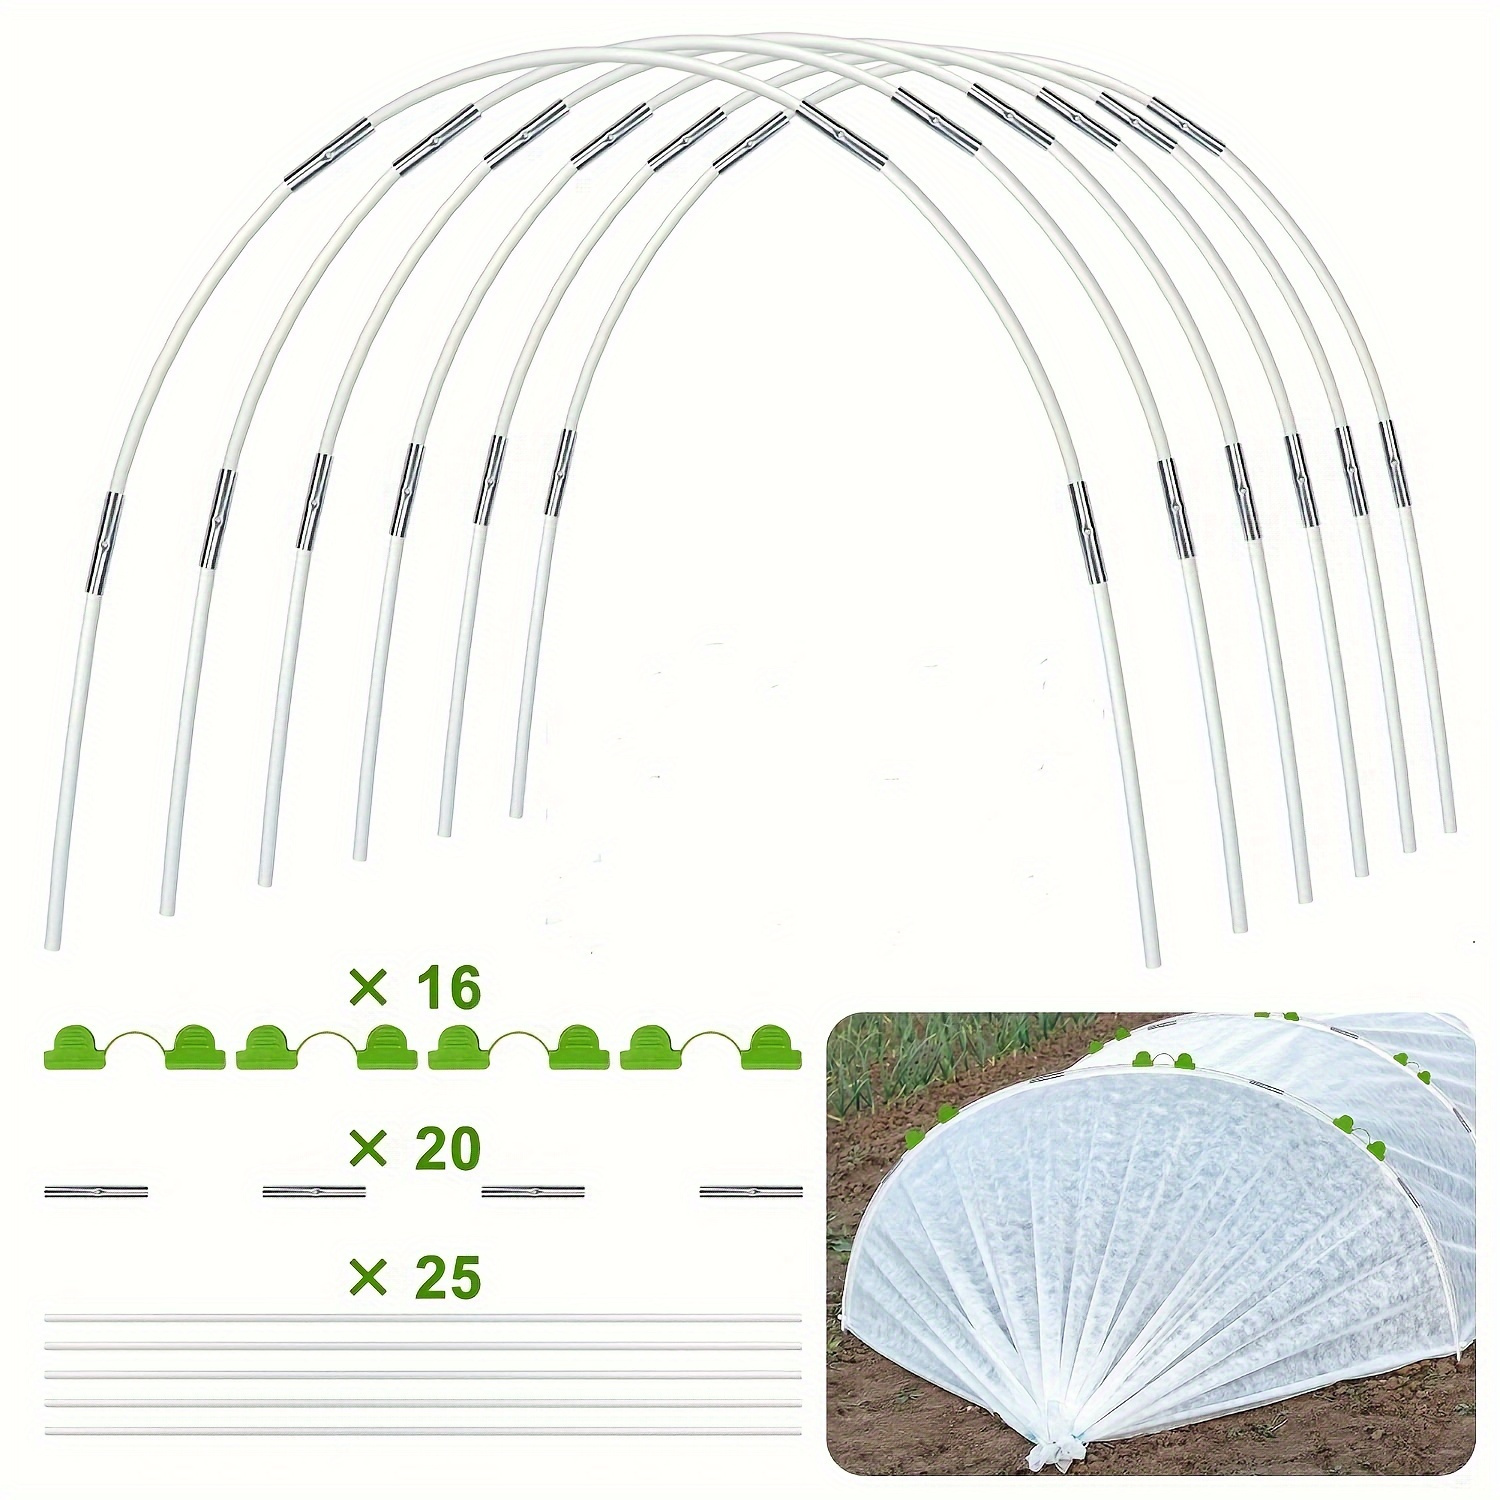 

61pcs, Used For Diy Greenhouse Clamps For Planting Tunnels 43 Inches Or Wider, Rust-proof Fiberglass Support Clamps For Garden Fabrics, Diy Plant Support Garden Stakes, Gardening Supplies